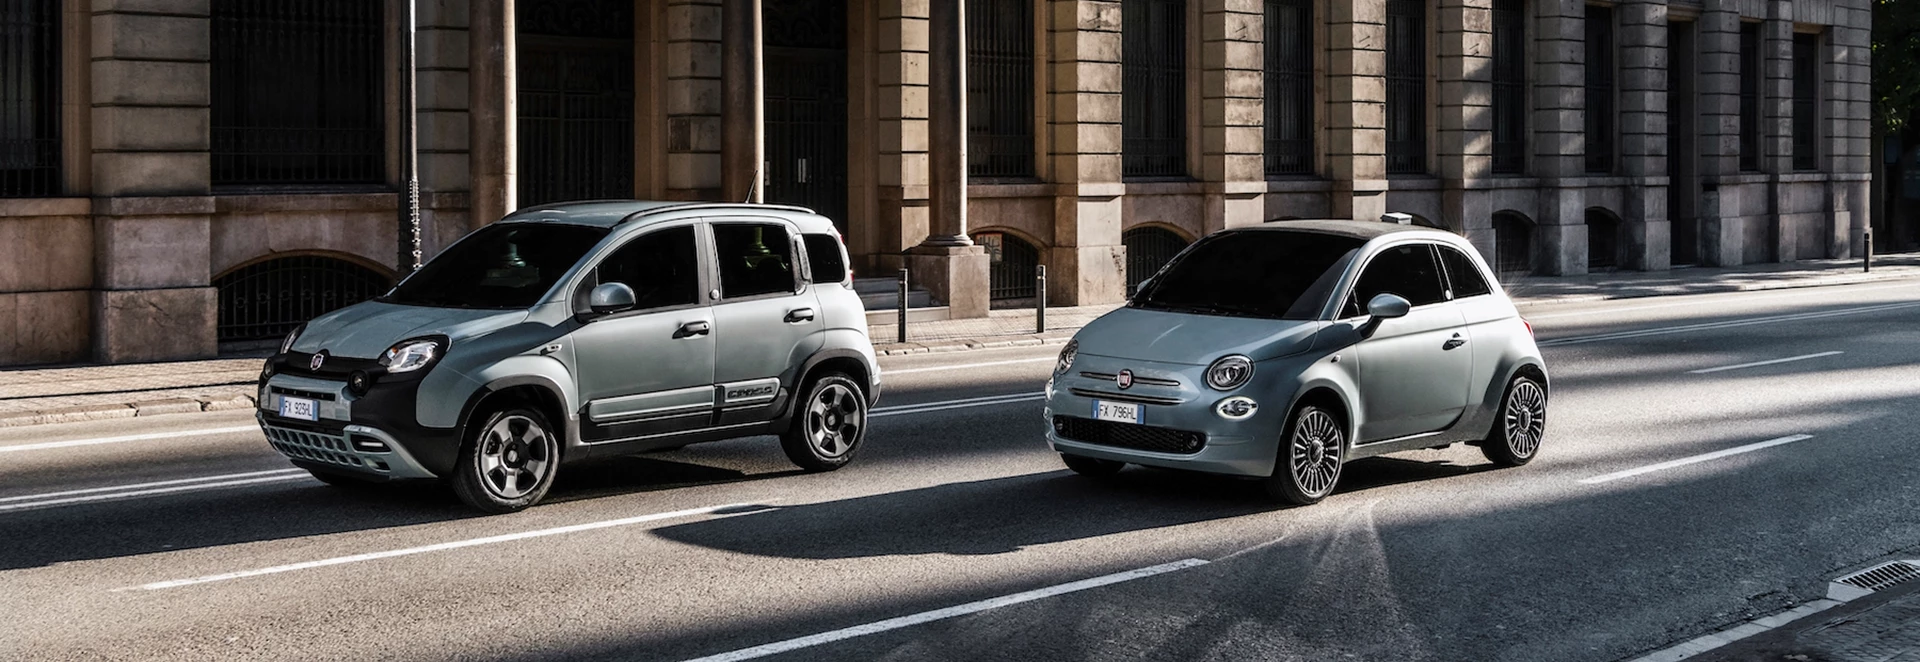 Fiat announces new mild-hybrid powertrain for its Panda and 500 city cars